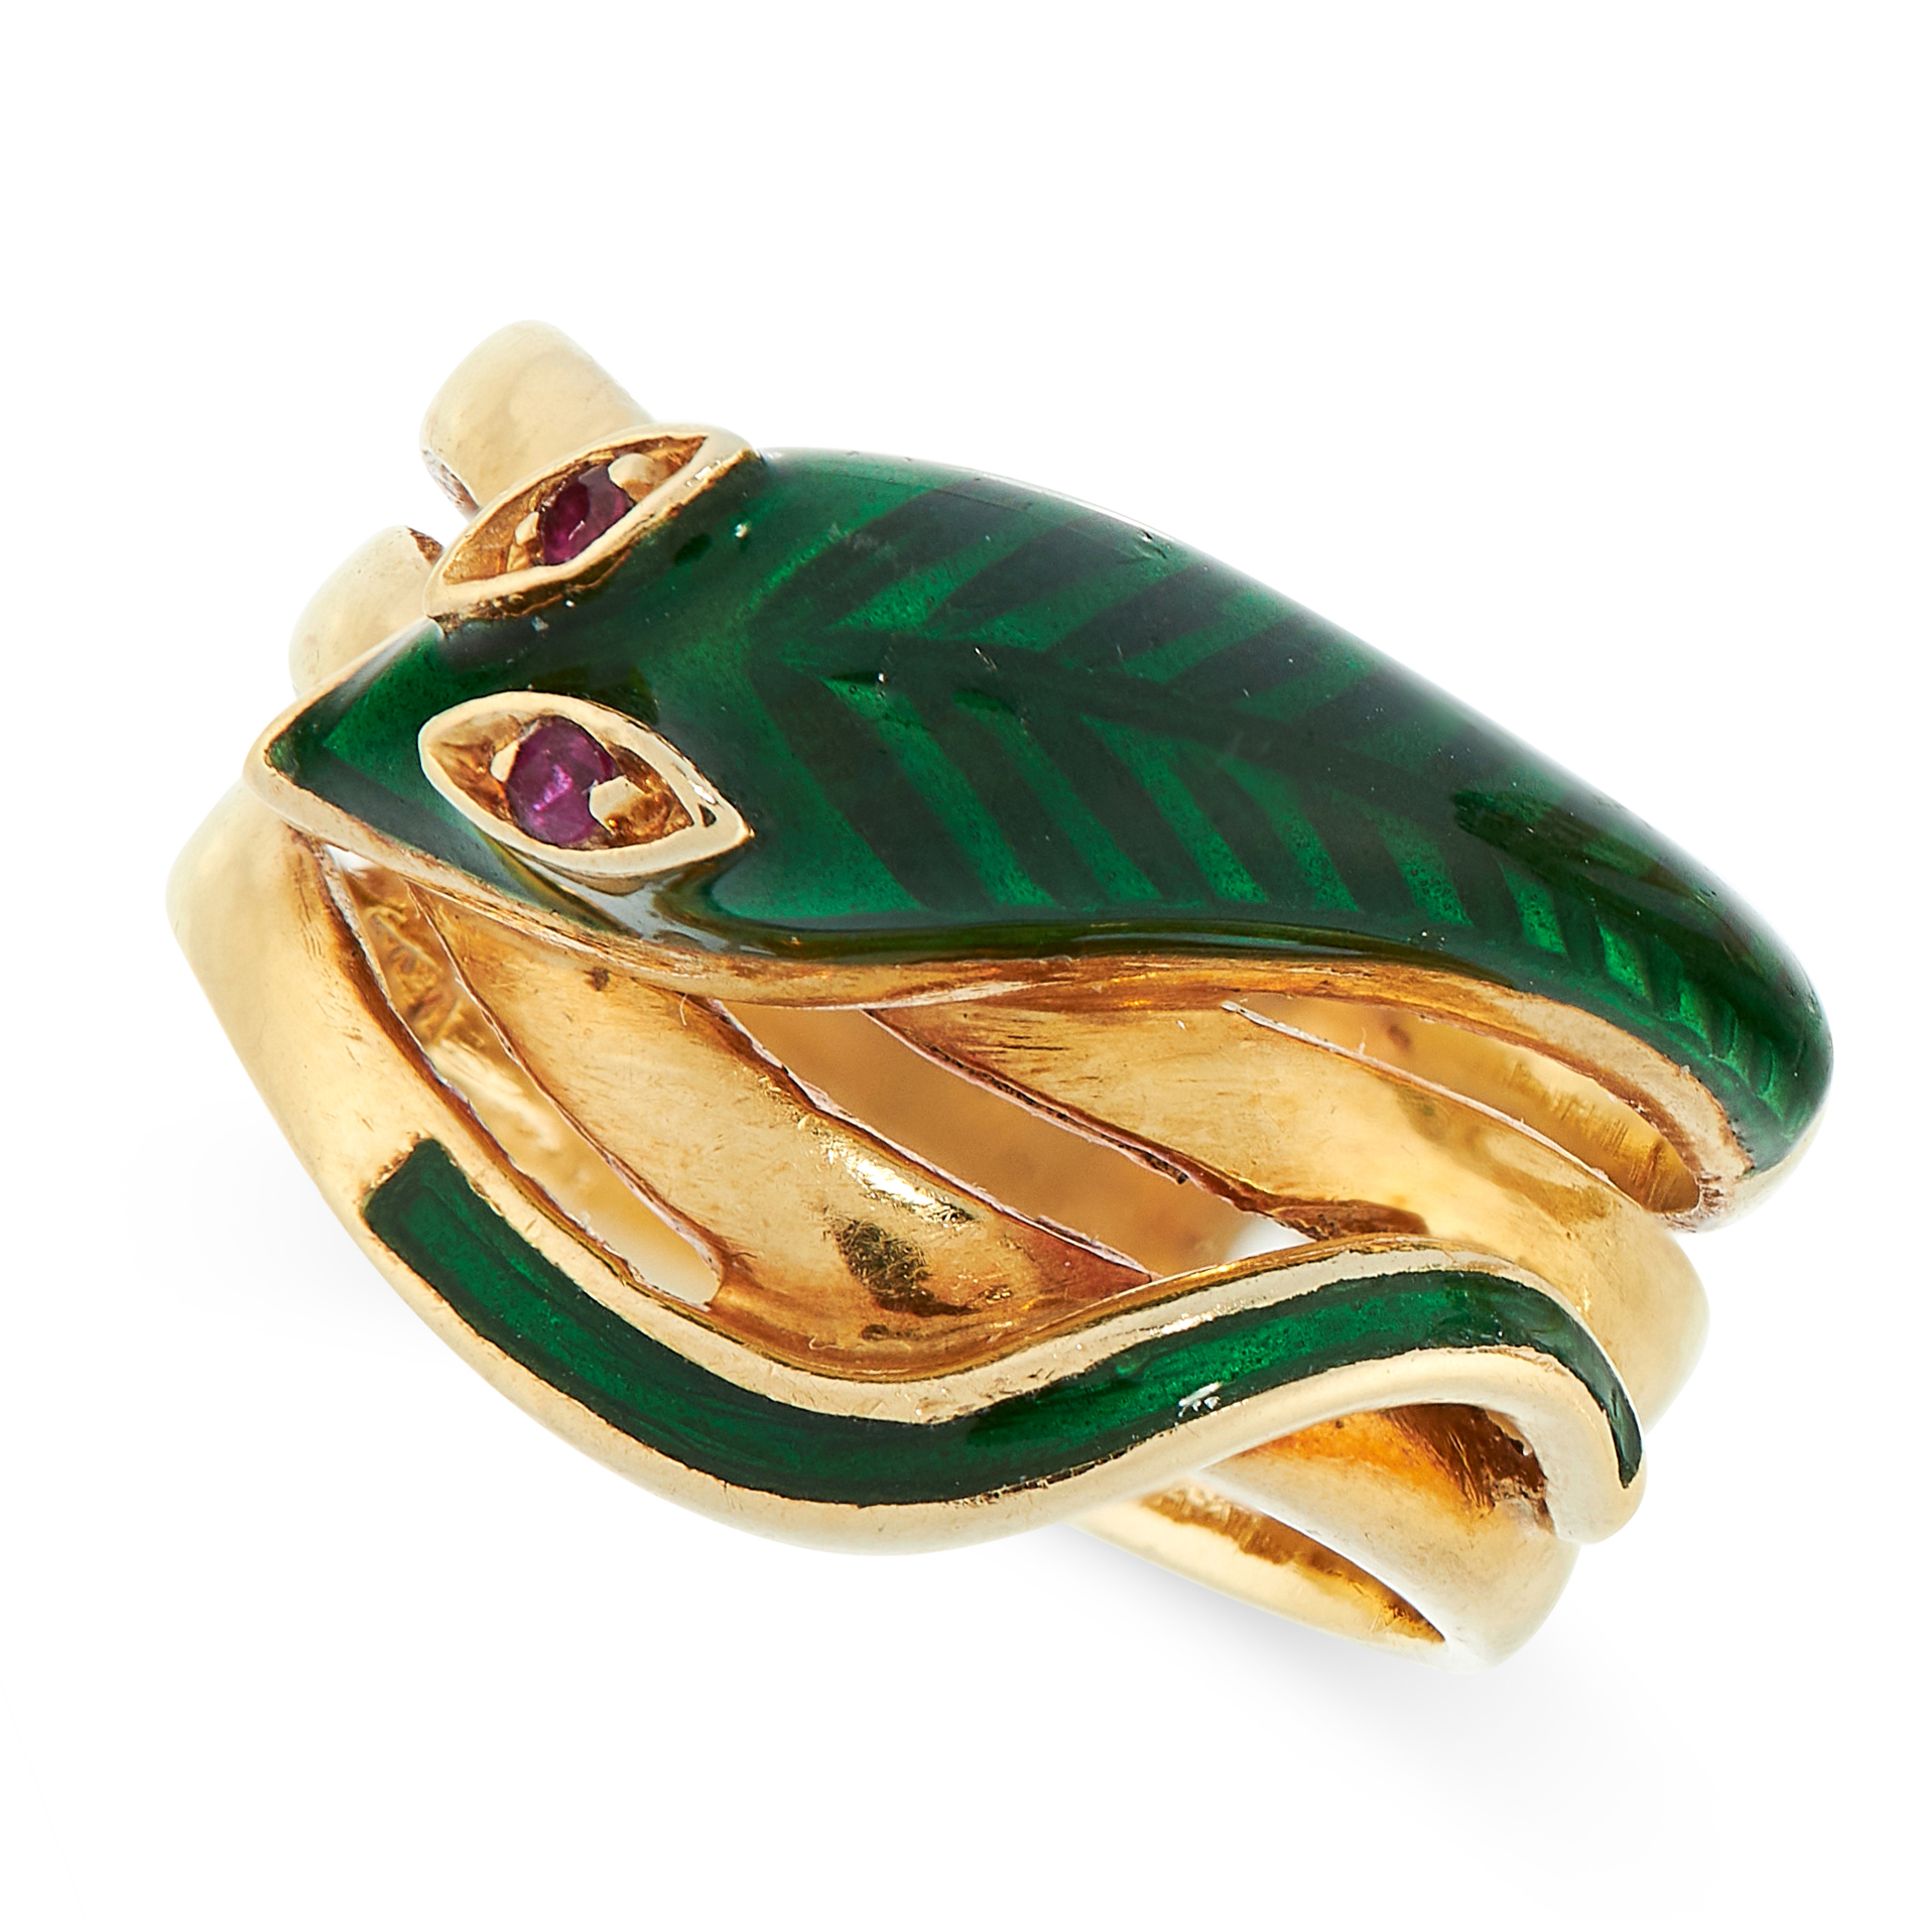 RUBY AND ENAMEL SNAKE RING, MAUBOUSSIN designed as a snake coiled around itself, set with green